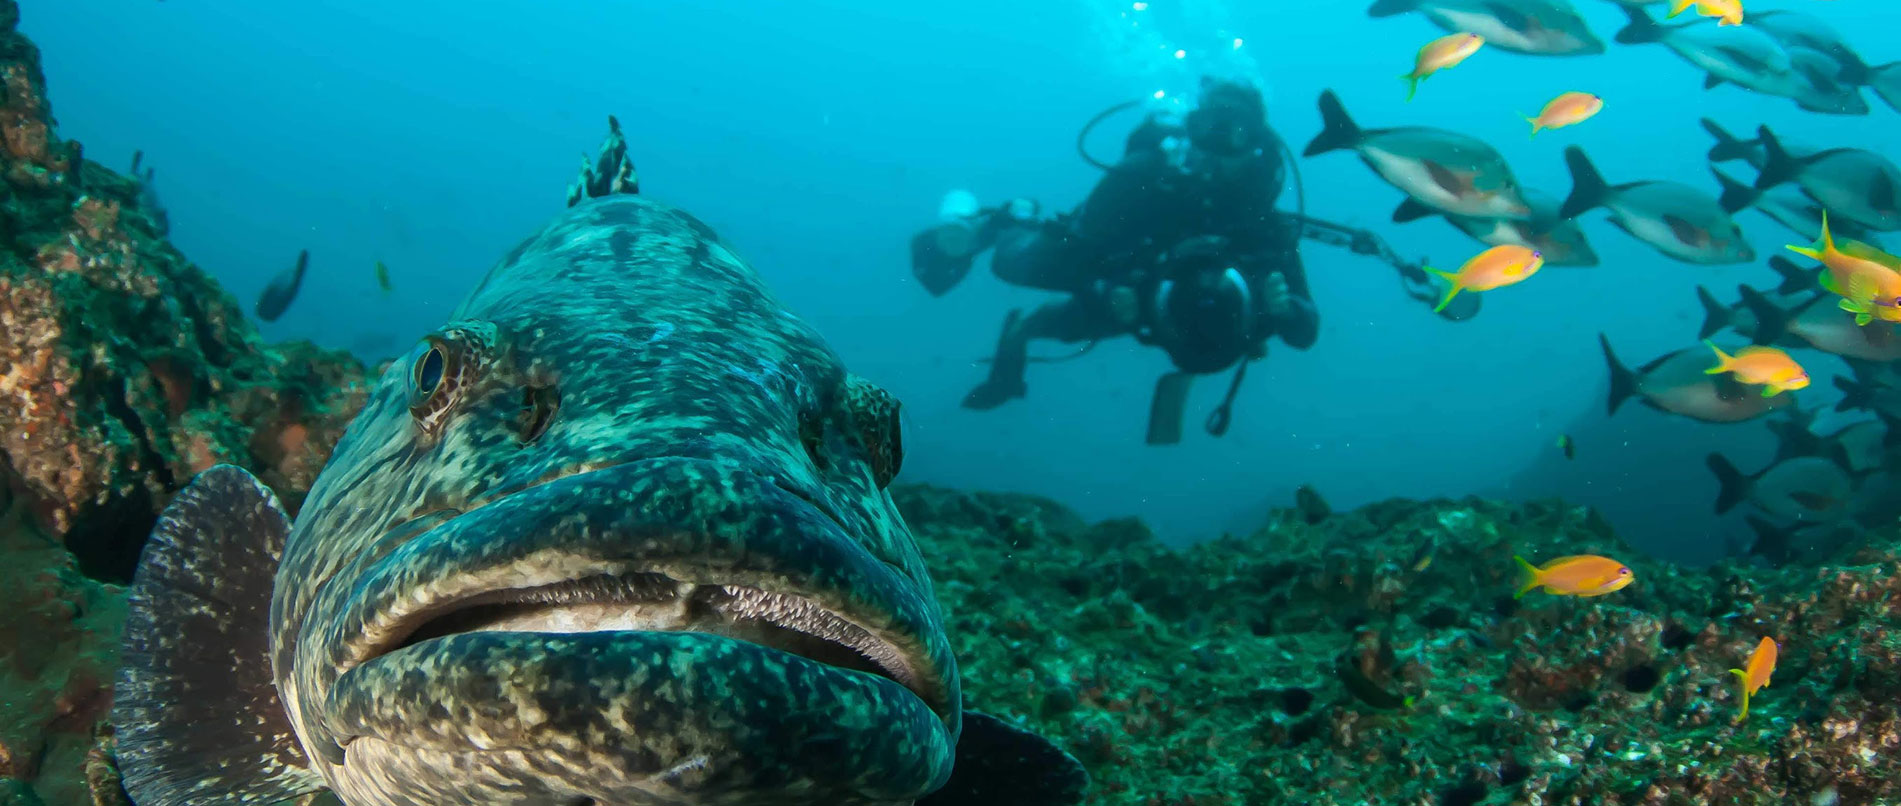 South Africa: Underwater Photography and Video Internship ...